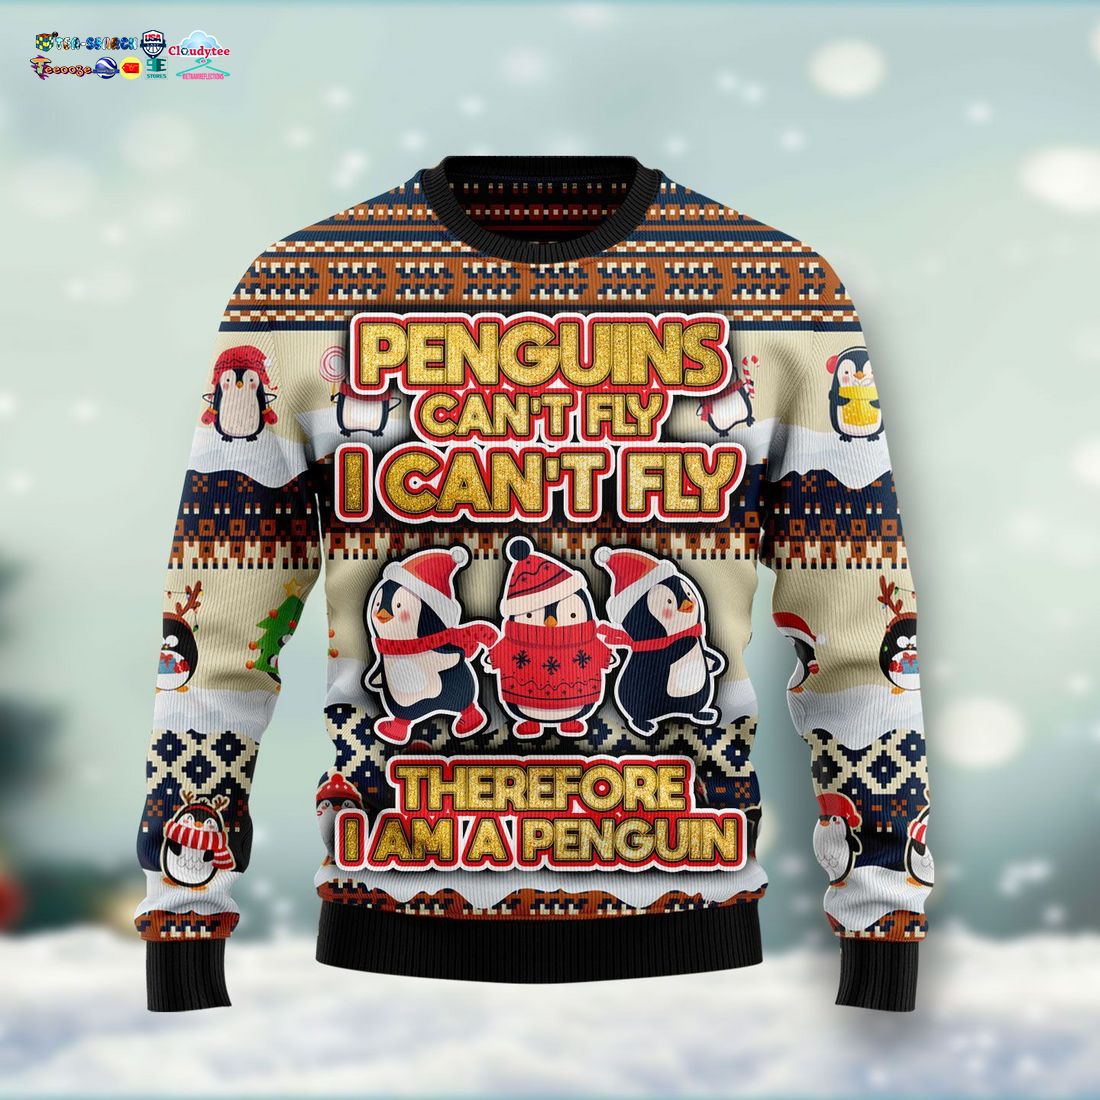 Penguins Can't Fly Ugly Christmas Sweater - Nice photo dude